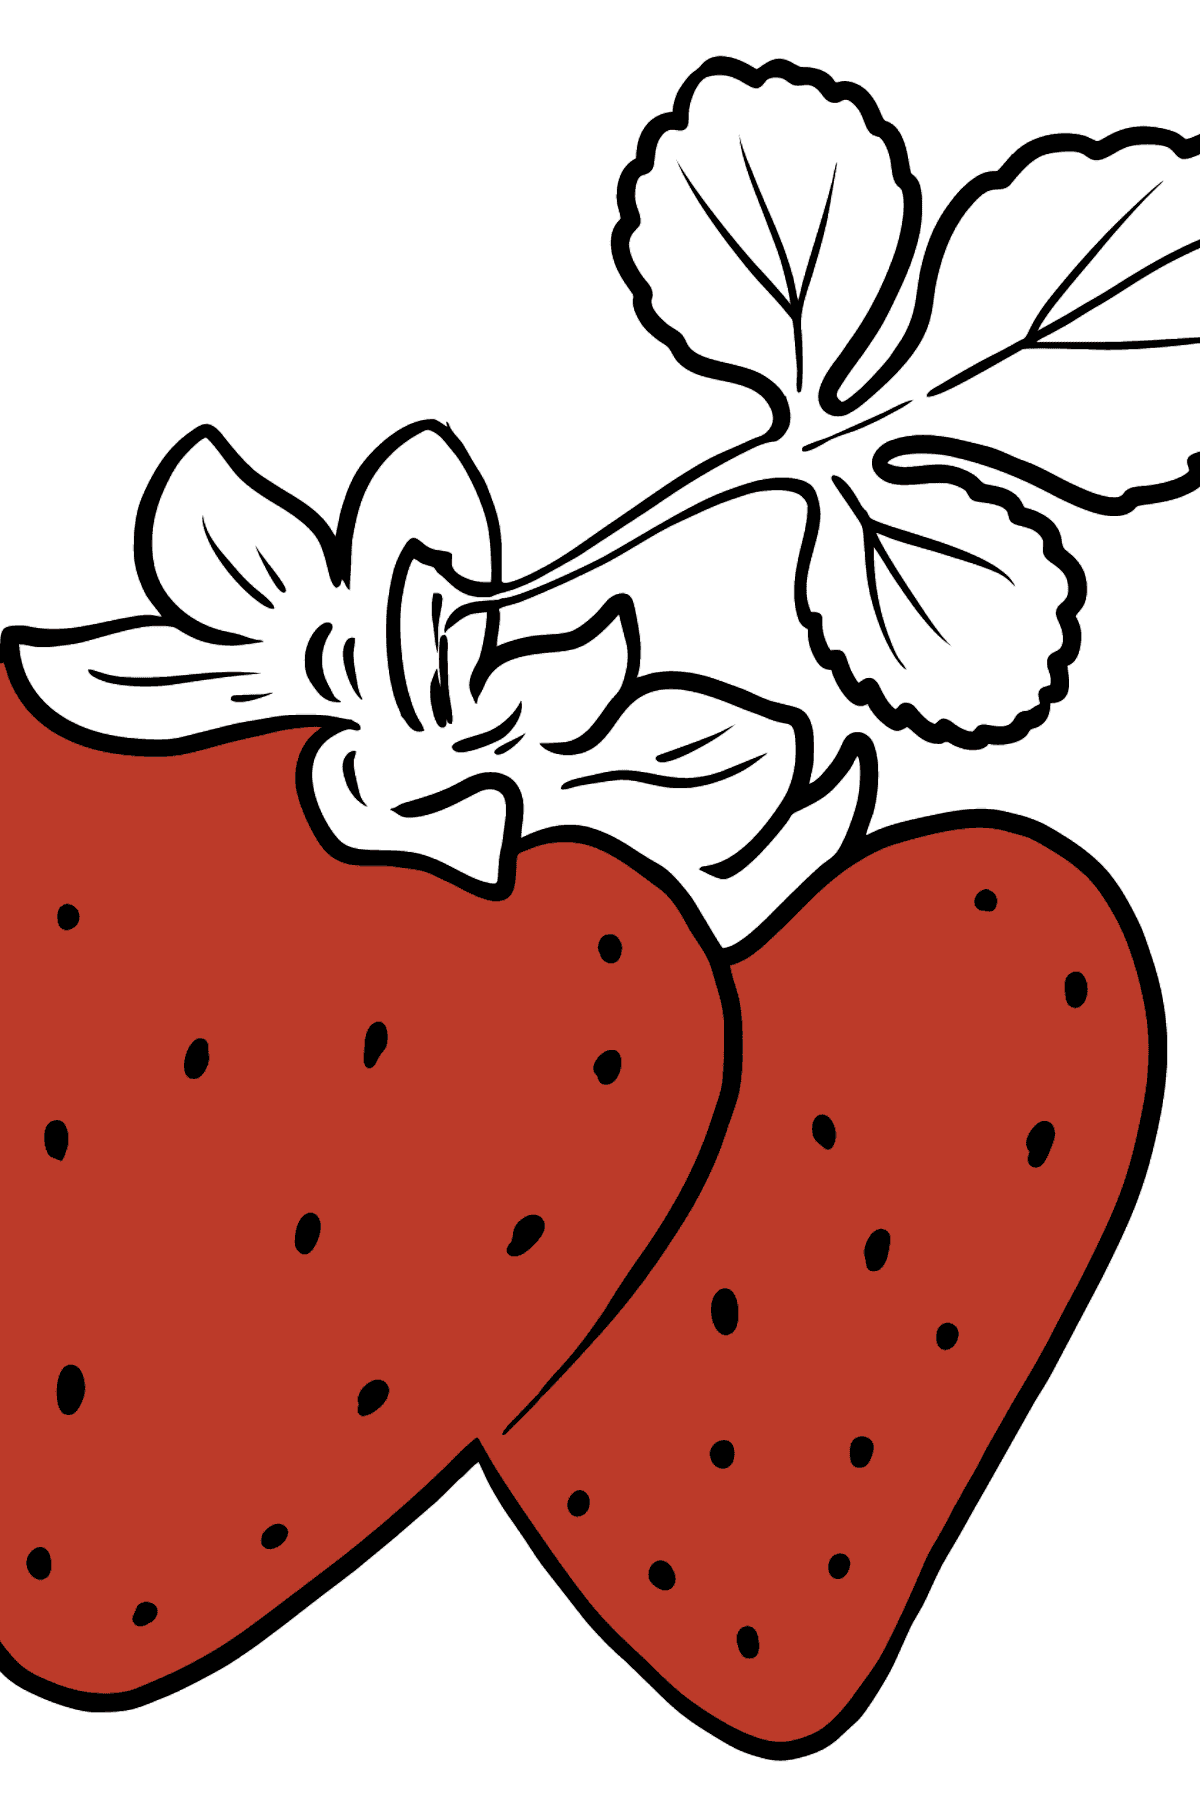 Strawberry coloring page - Coloring Pages for Kids